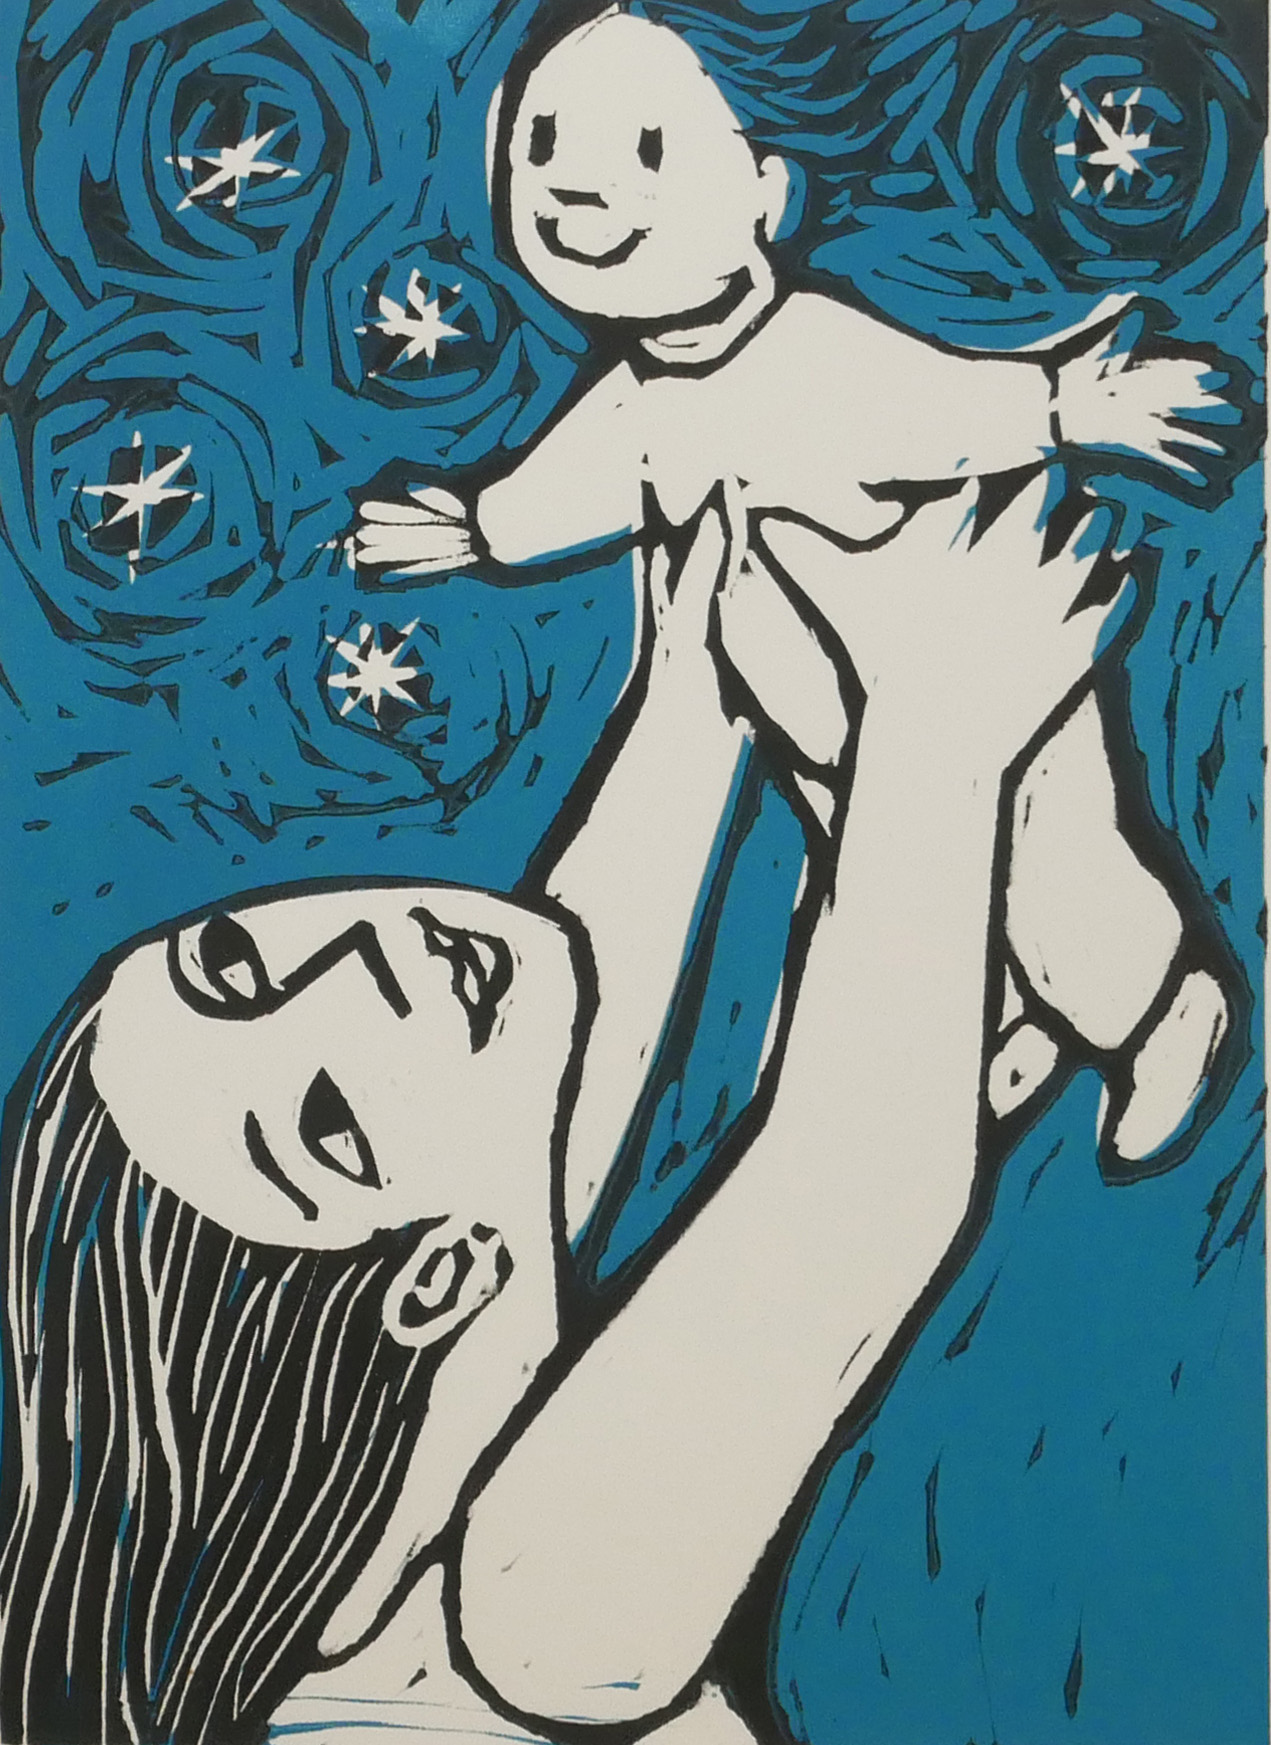 ANITA KLEIN, AUSTRALIAN, B. 1960, LIMITED EDITION (14/50) COLOUR LINOCUT Titled ‘Flying Baby’, 2011,